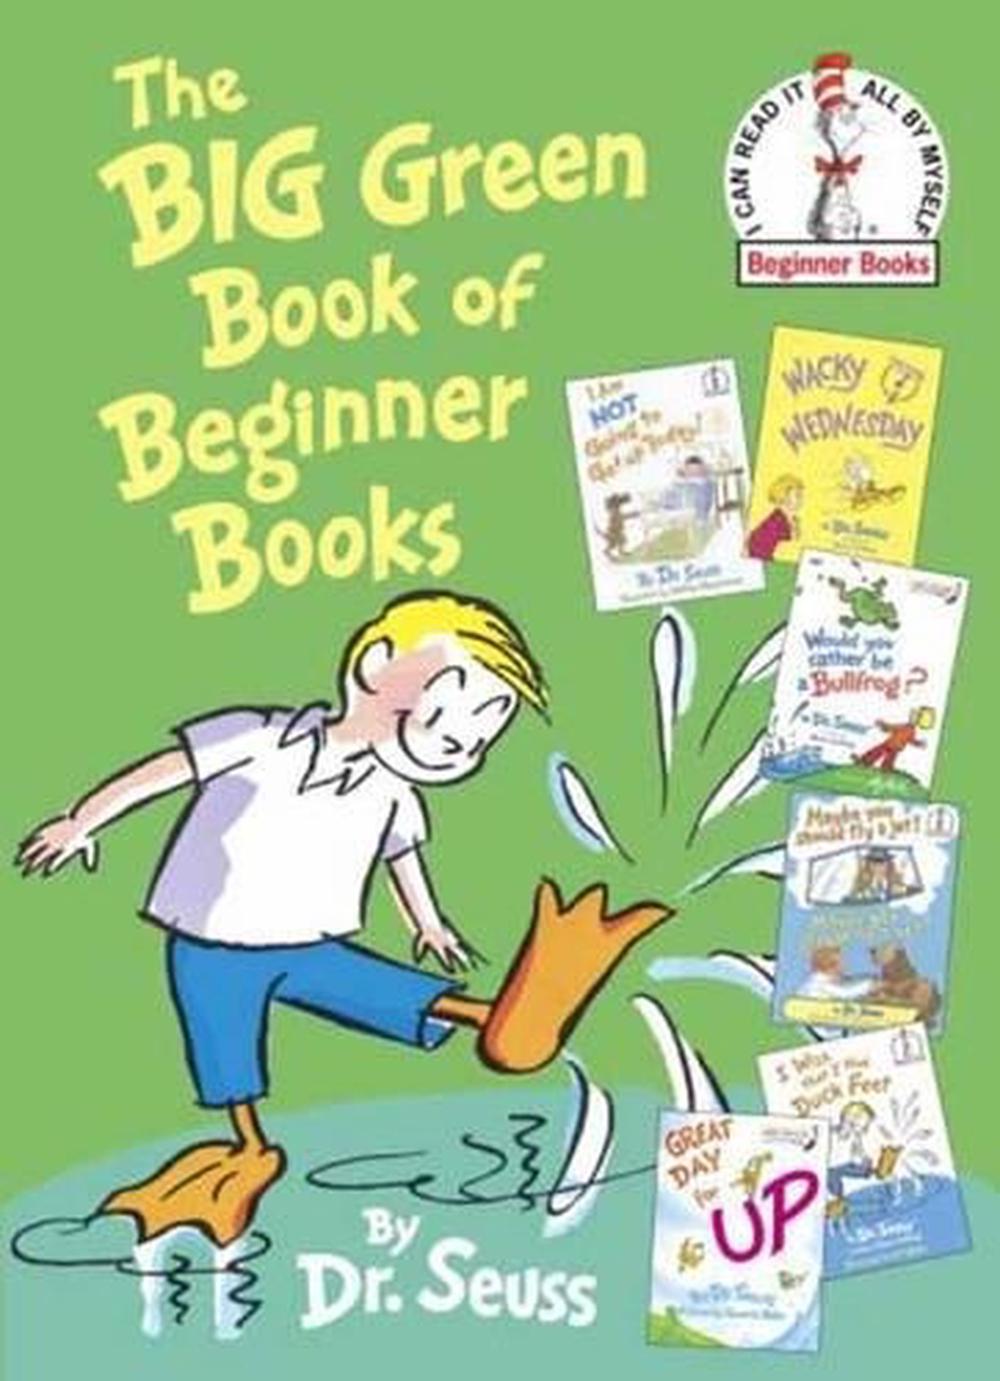 The Big Green Book of Beginner Books by Dr. Seuss, Hardcover